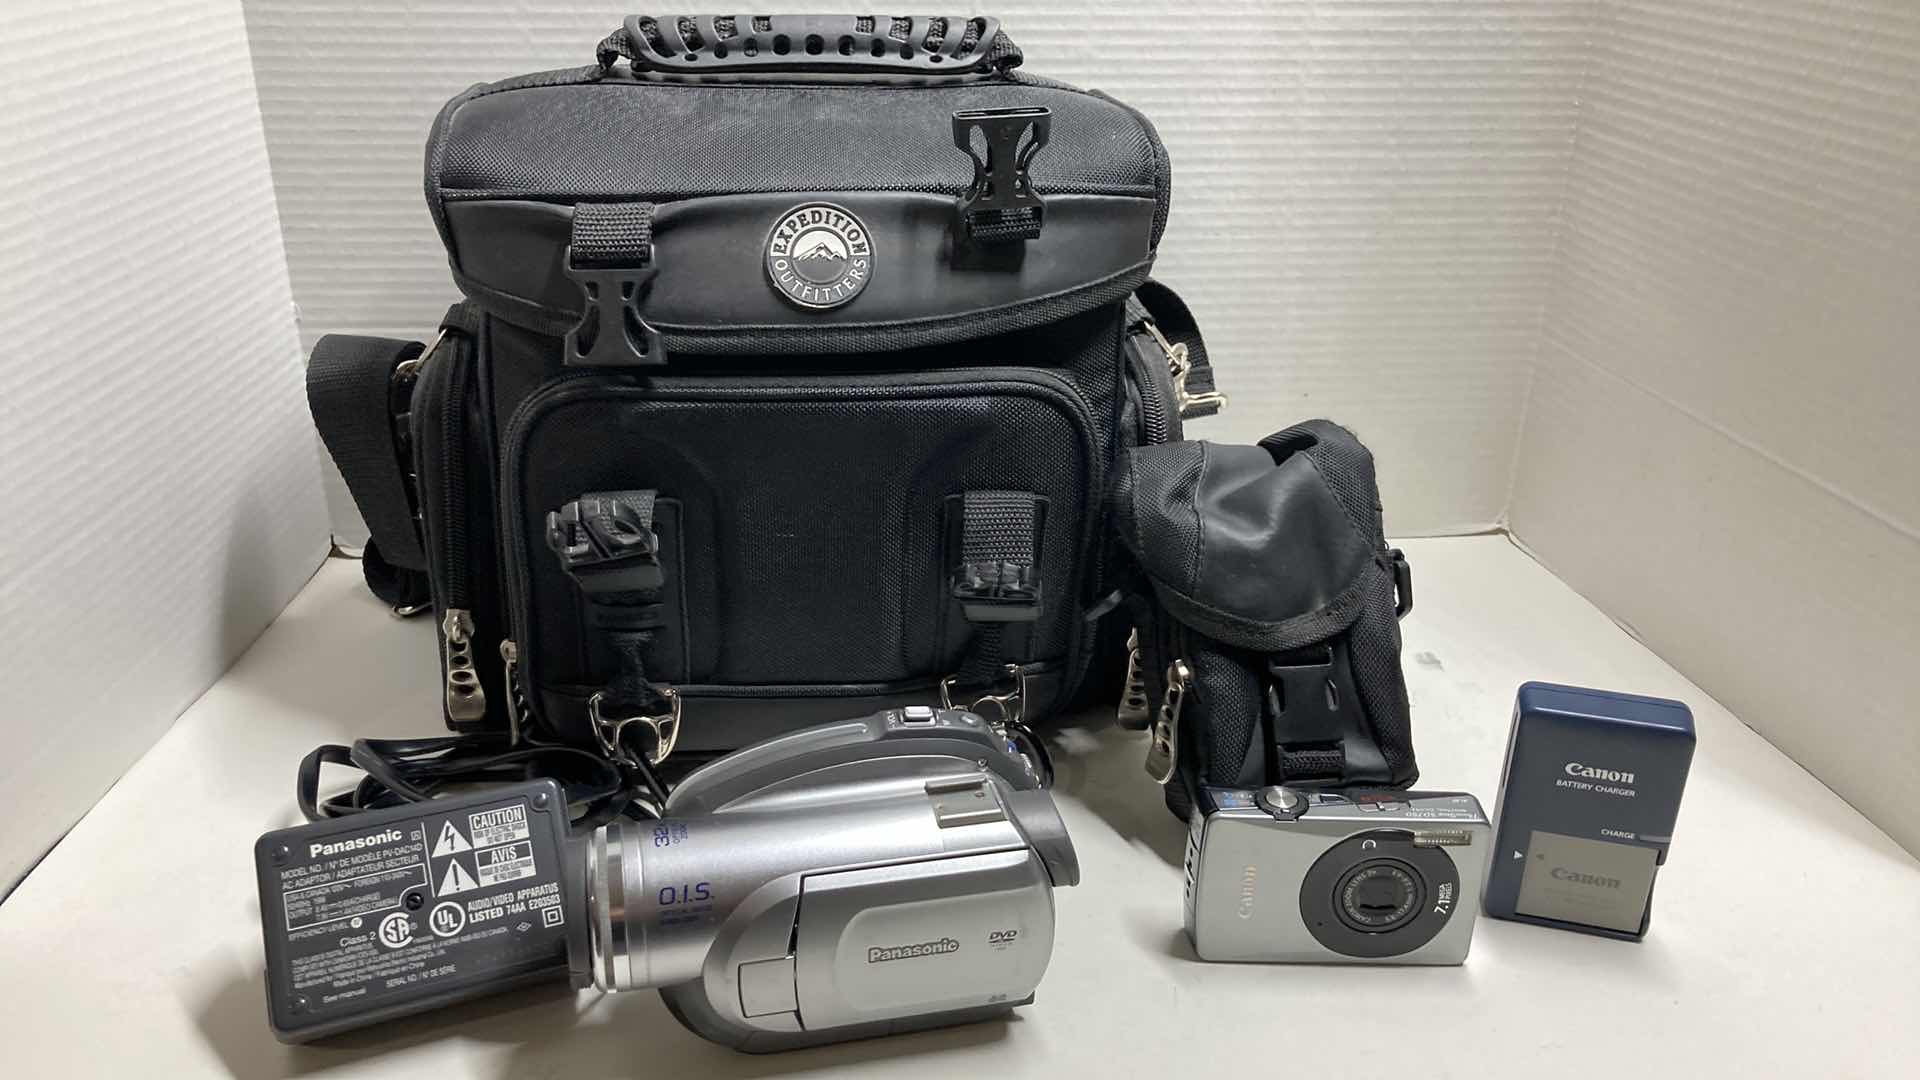 Photo 1 of PANASONIC DVD VIDEO CAMERA MODEL VDR-D220 & CANON POWERSHOT DIGITAL CAMERA MODEL SD750 W CHARGERS, BATTERIES & EXPEDITION OUTFITTERS CAMERA BAG